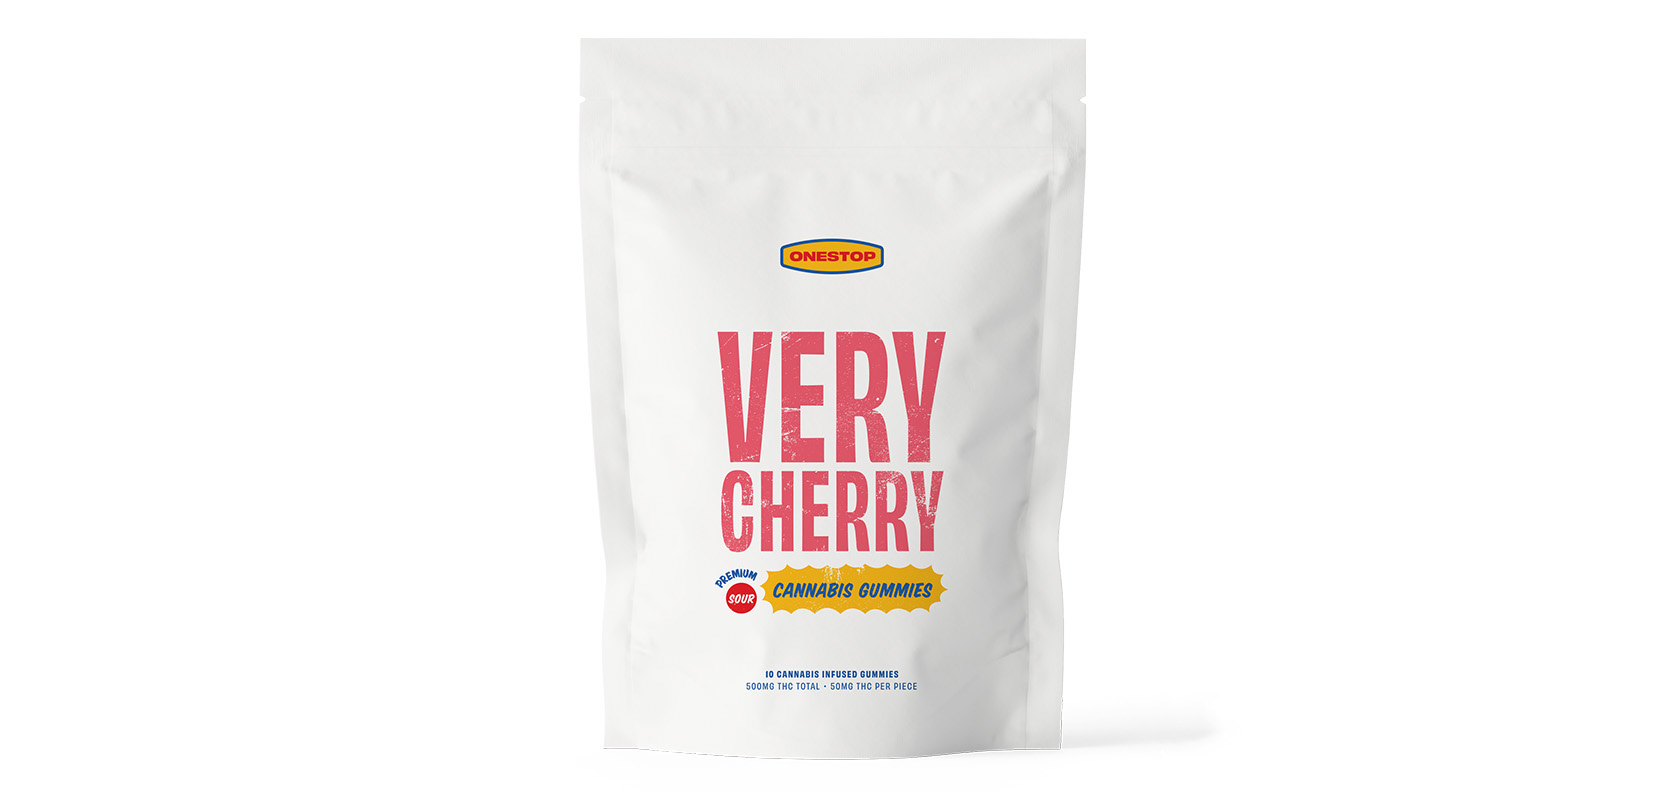 One Stop Sour Very Cherry THC Gummies 500mg for sale online dispensary.